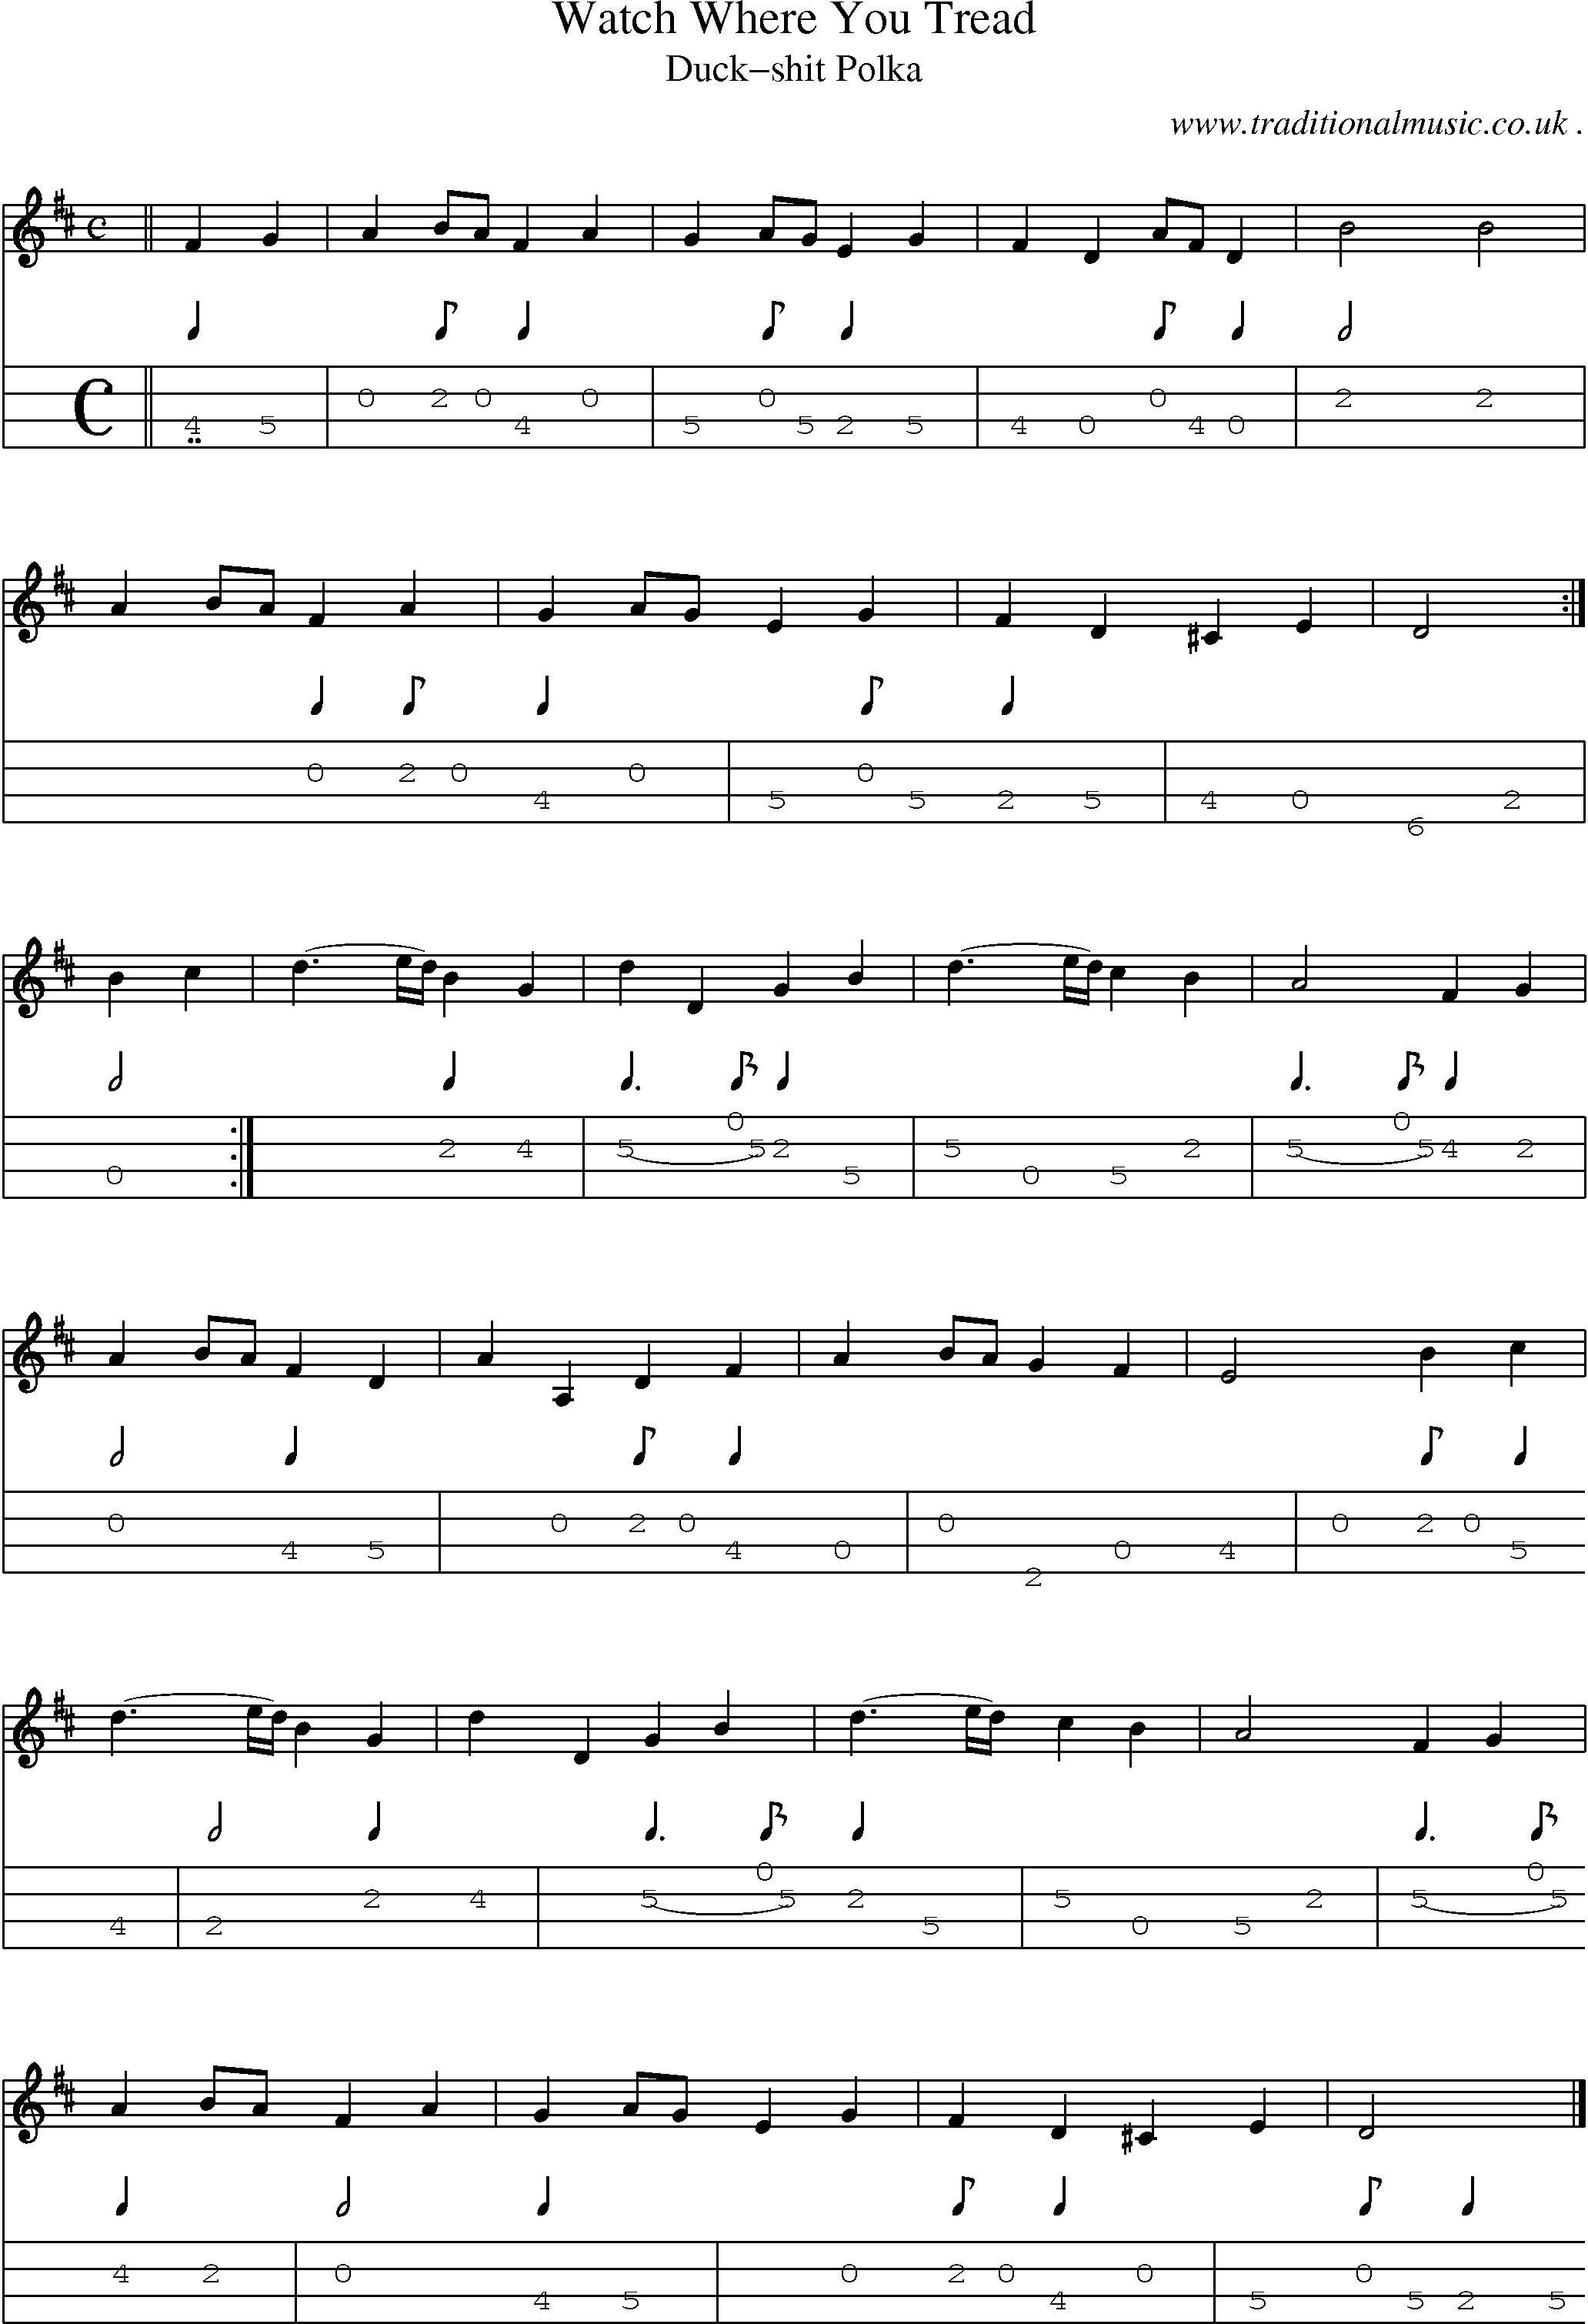 Sheet-music  score, Chords and Mandolin Tabs for Watch Where You Tread